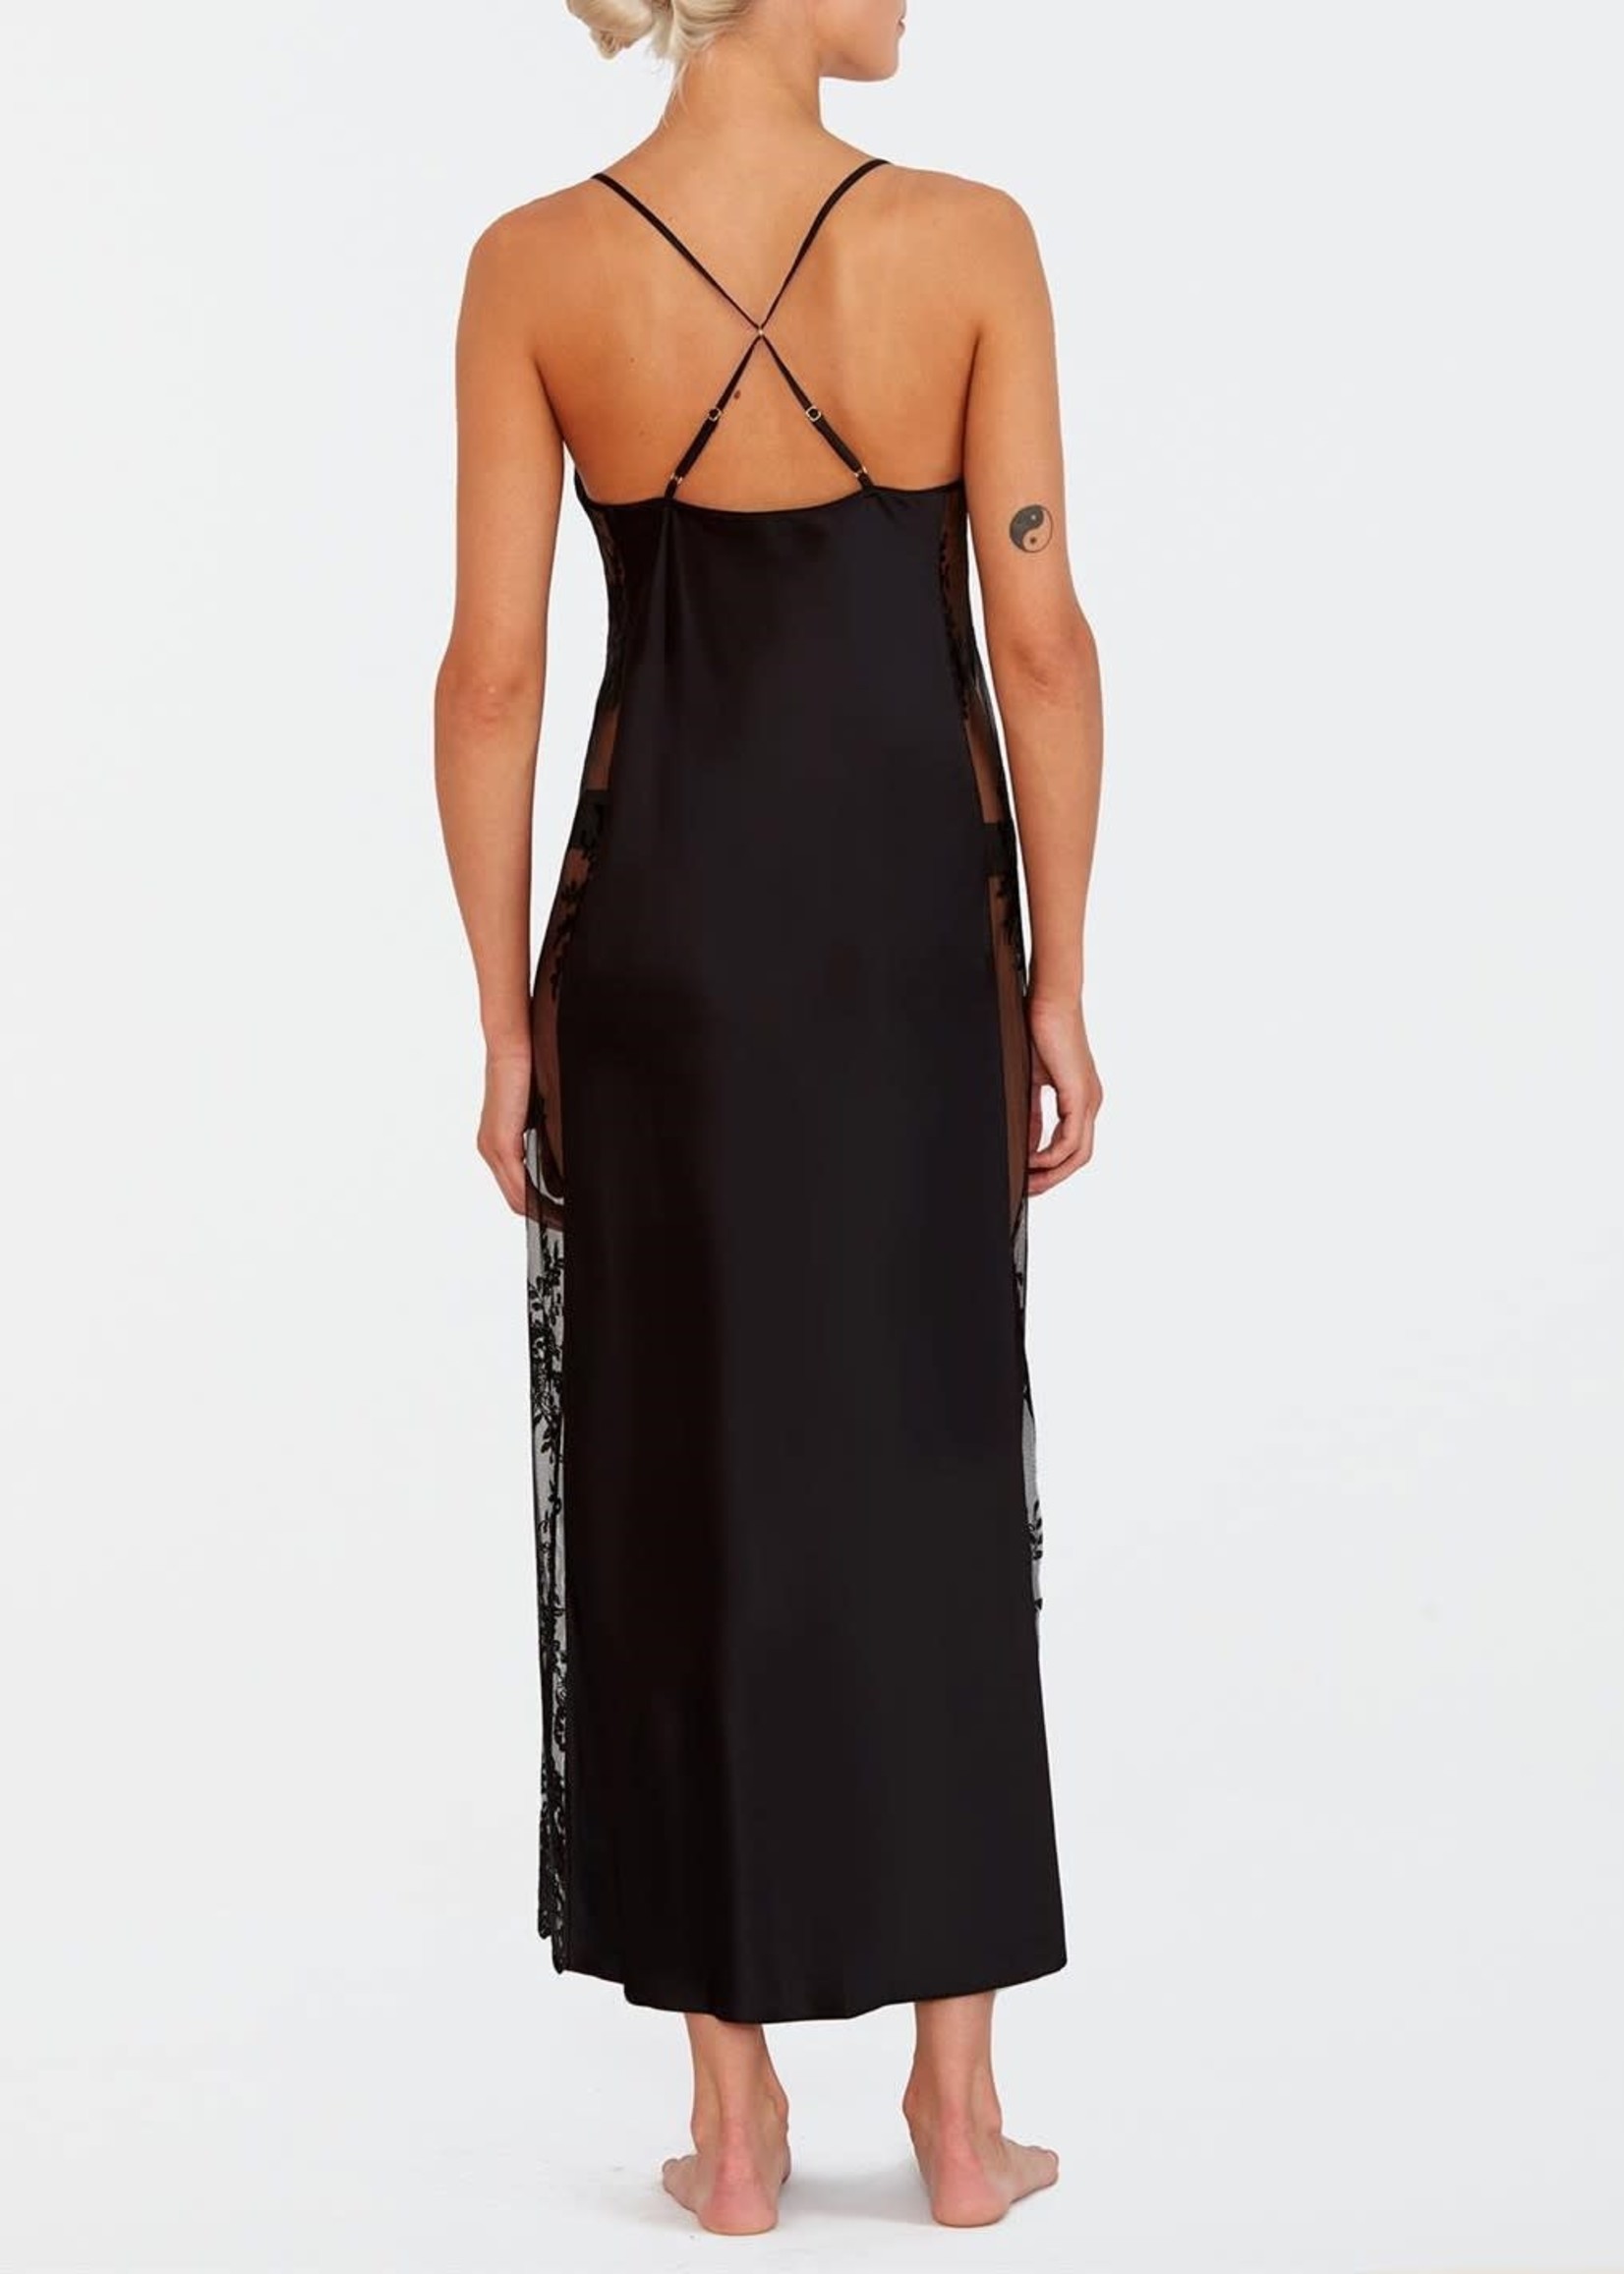 Rya Collection Darling Gown - Black